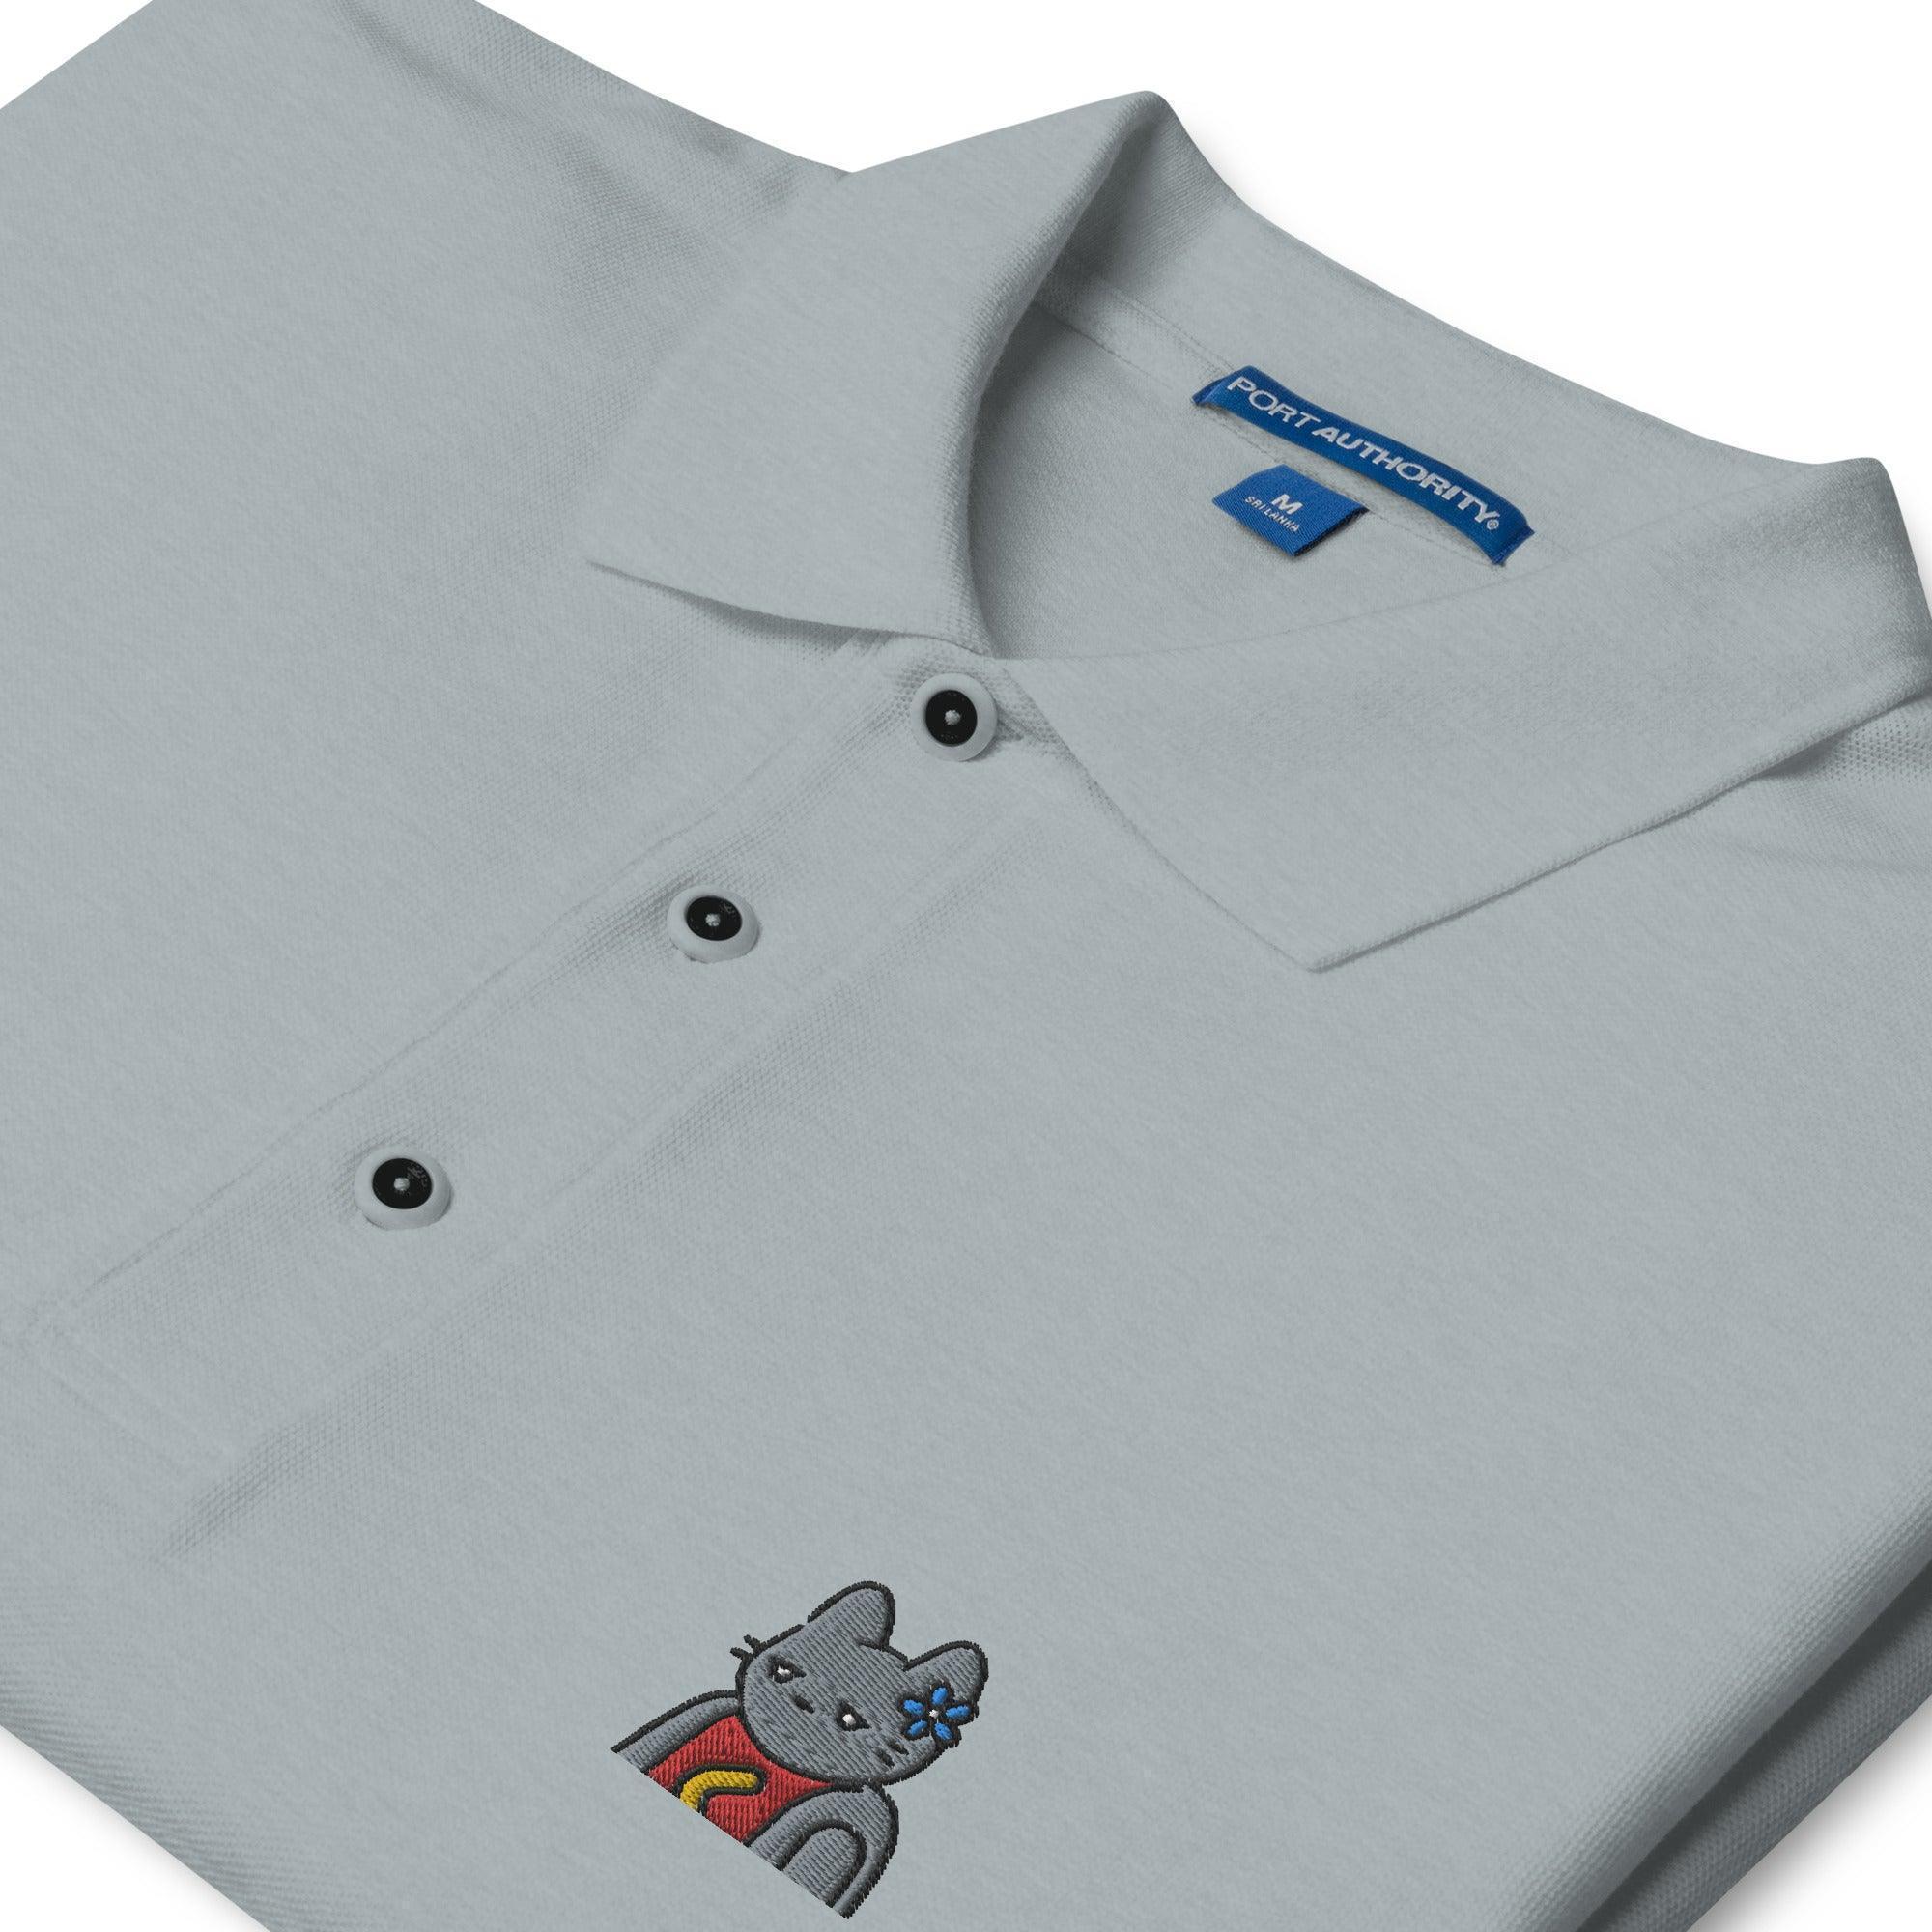 Cool Cats P4 Polo Shirt - InvestmenTees